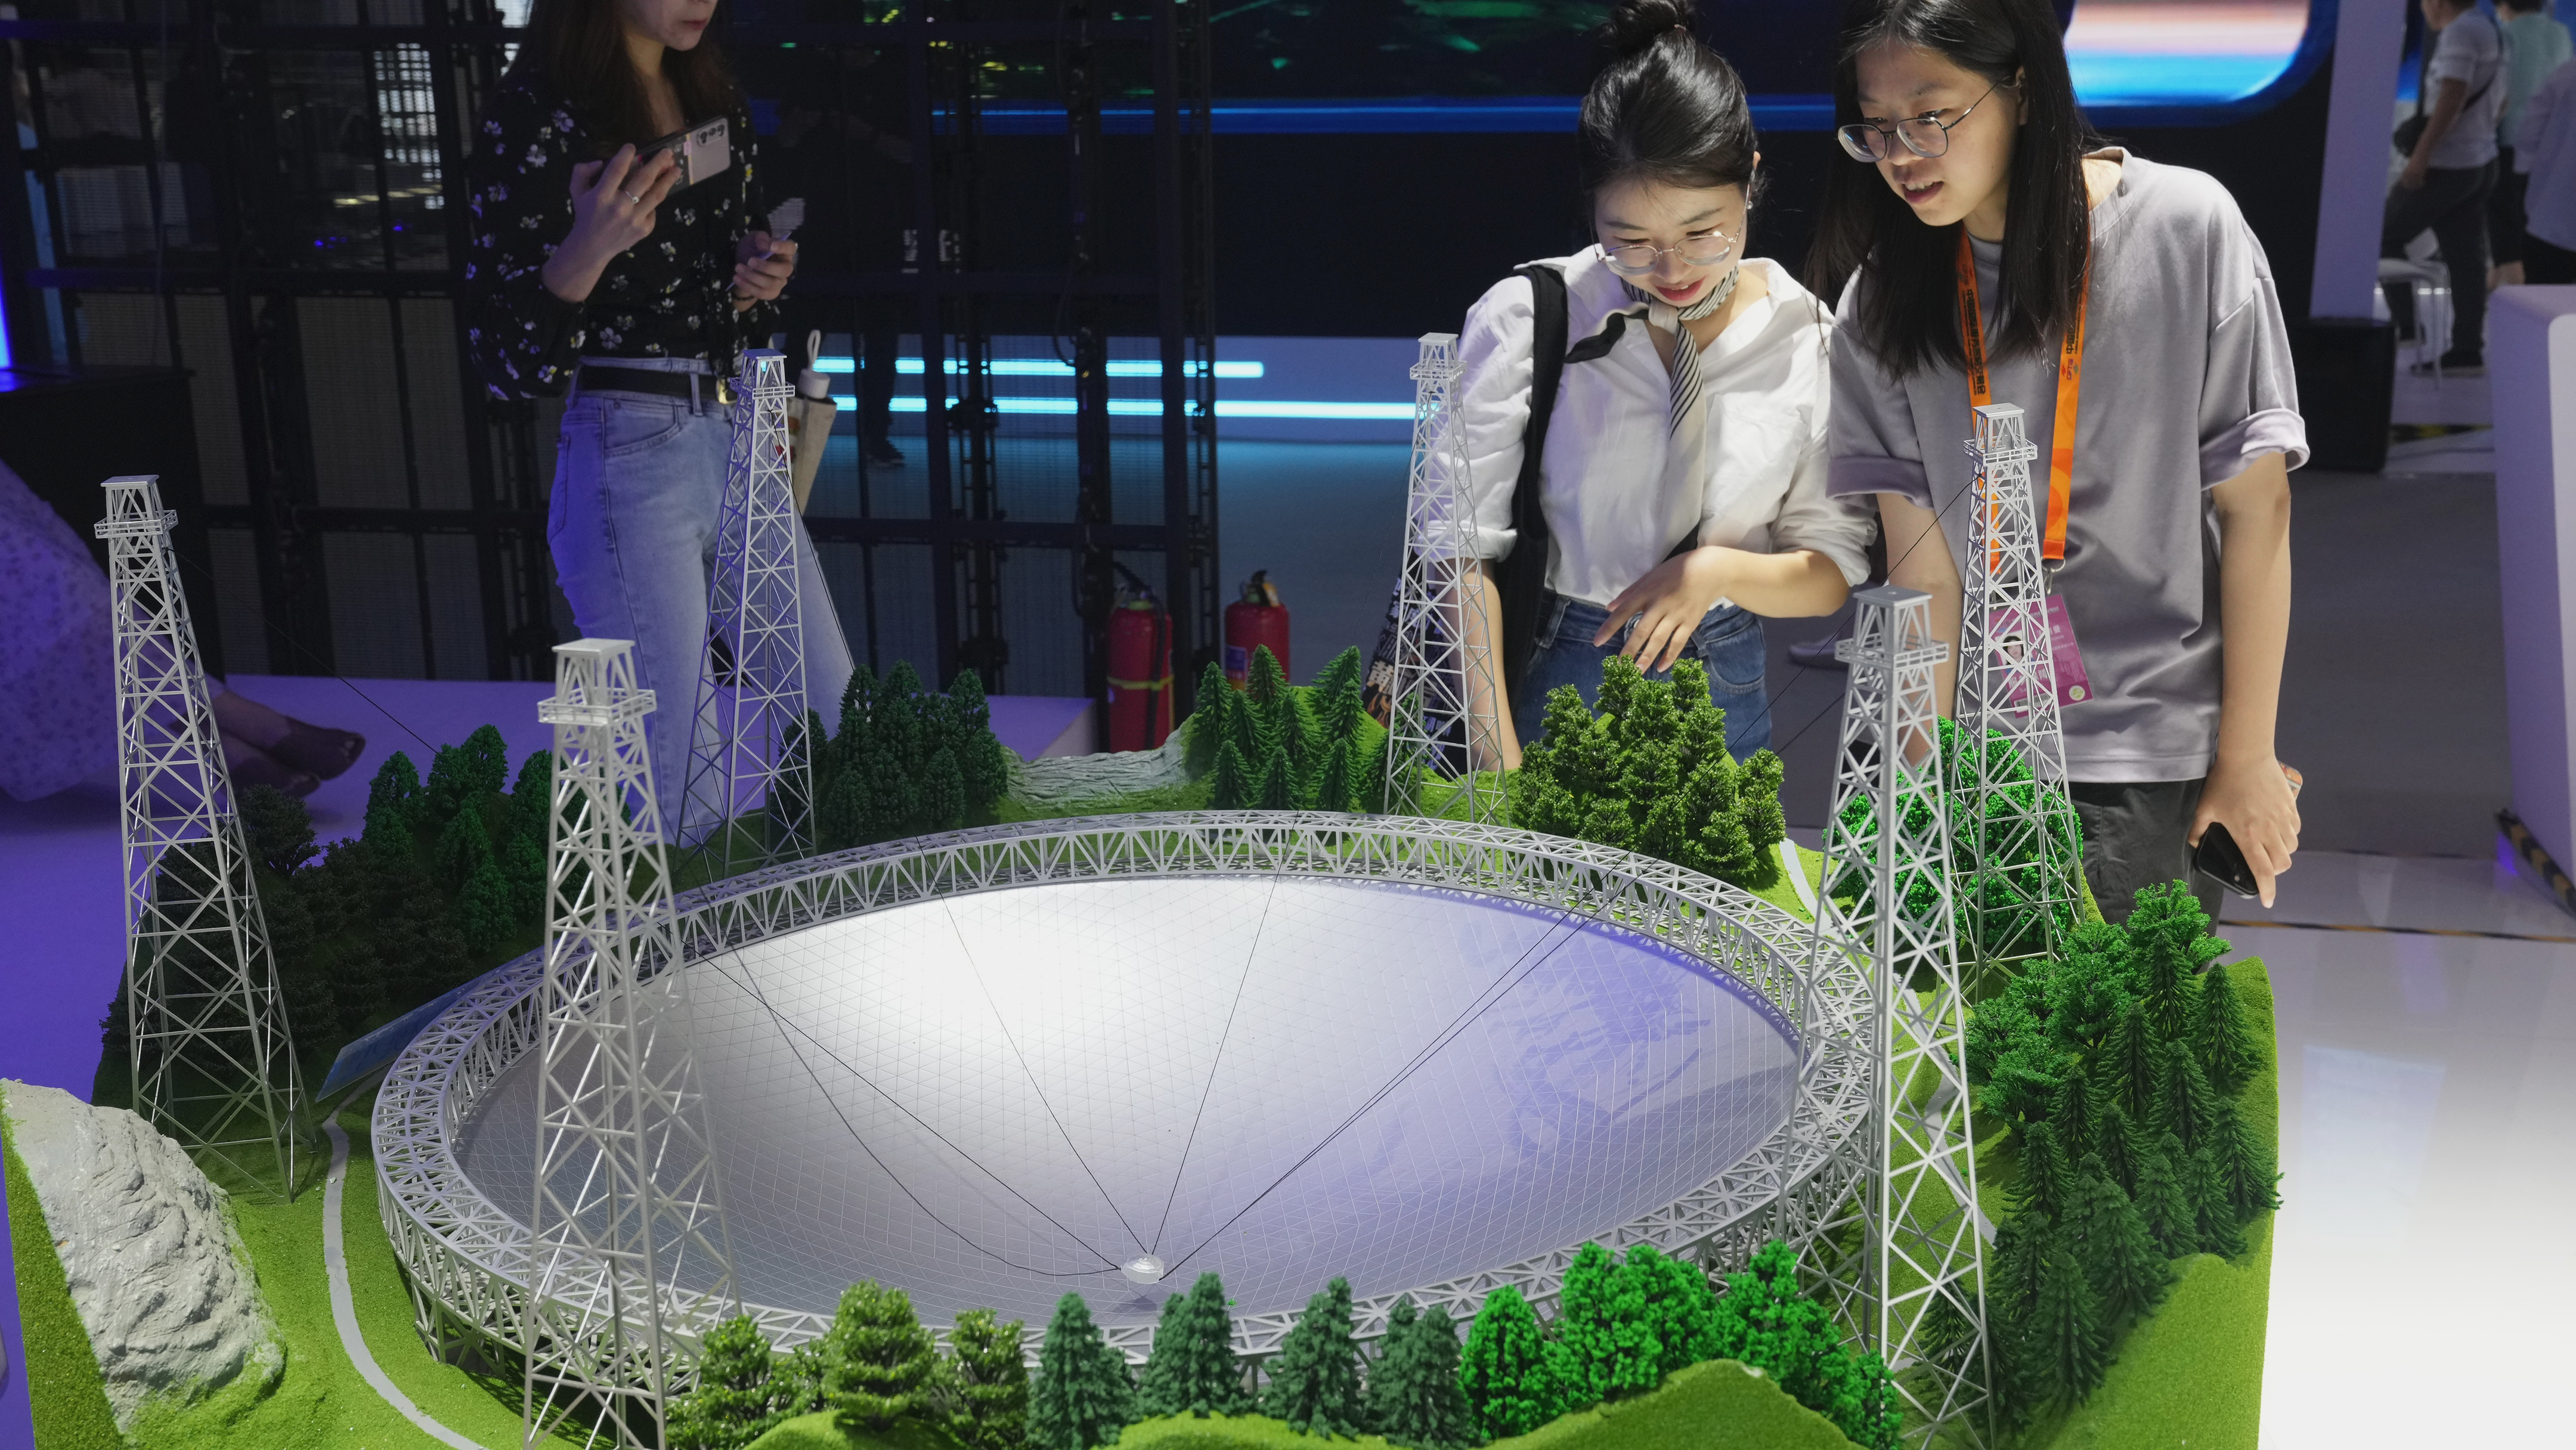 Visitors watch the model of the China's Eye of Heaven.